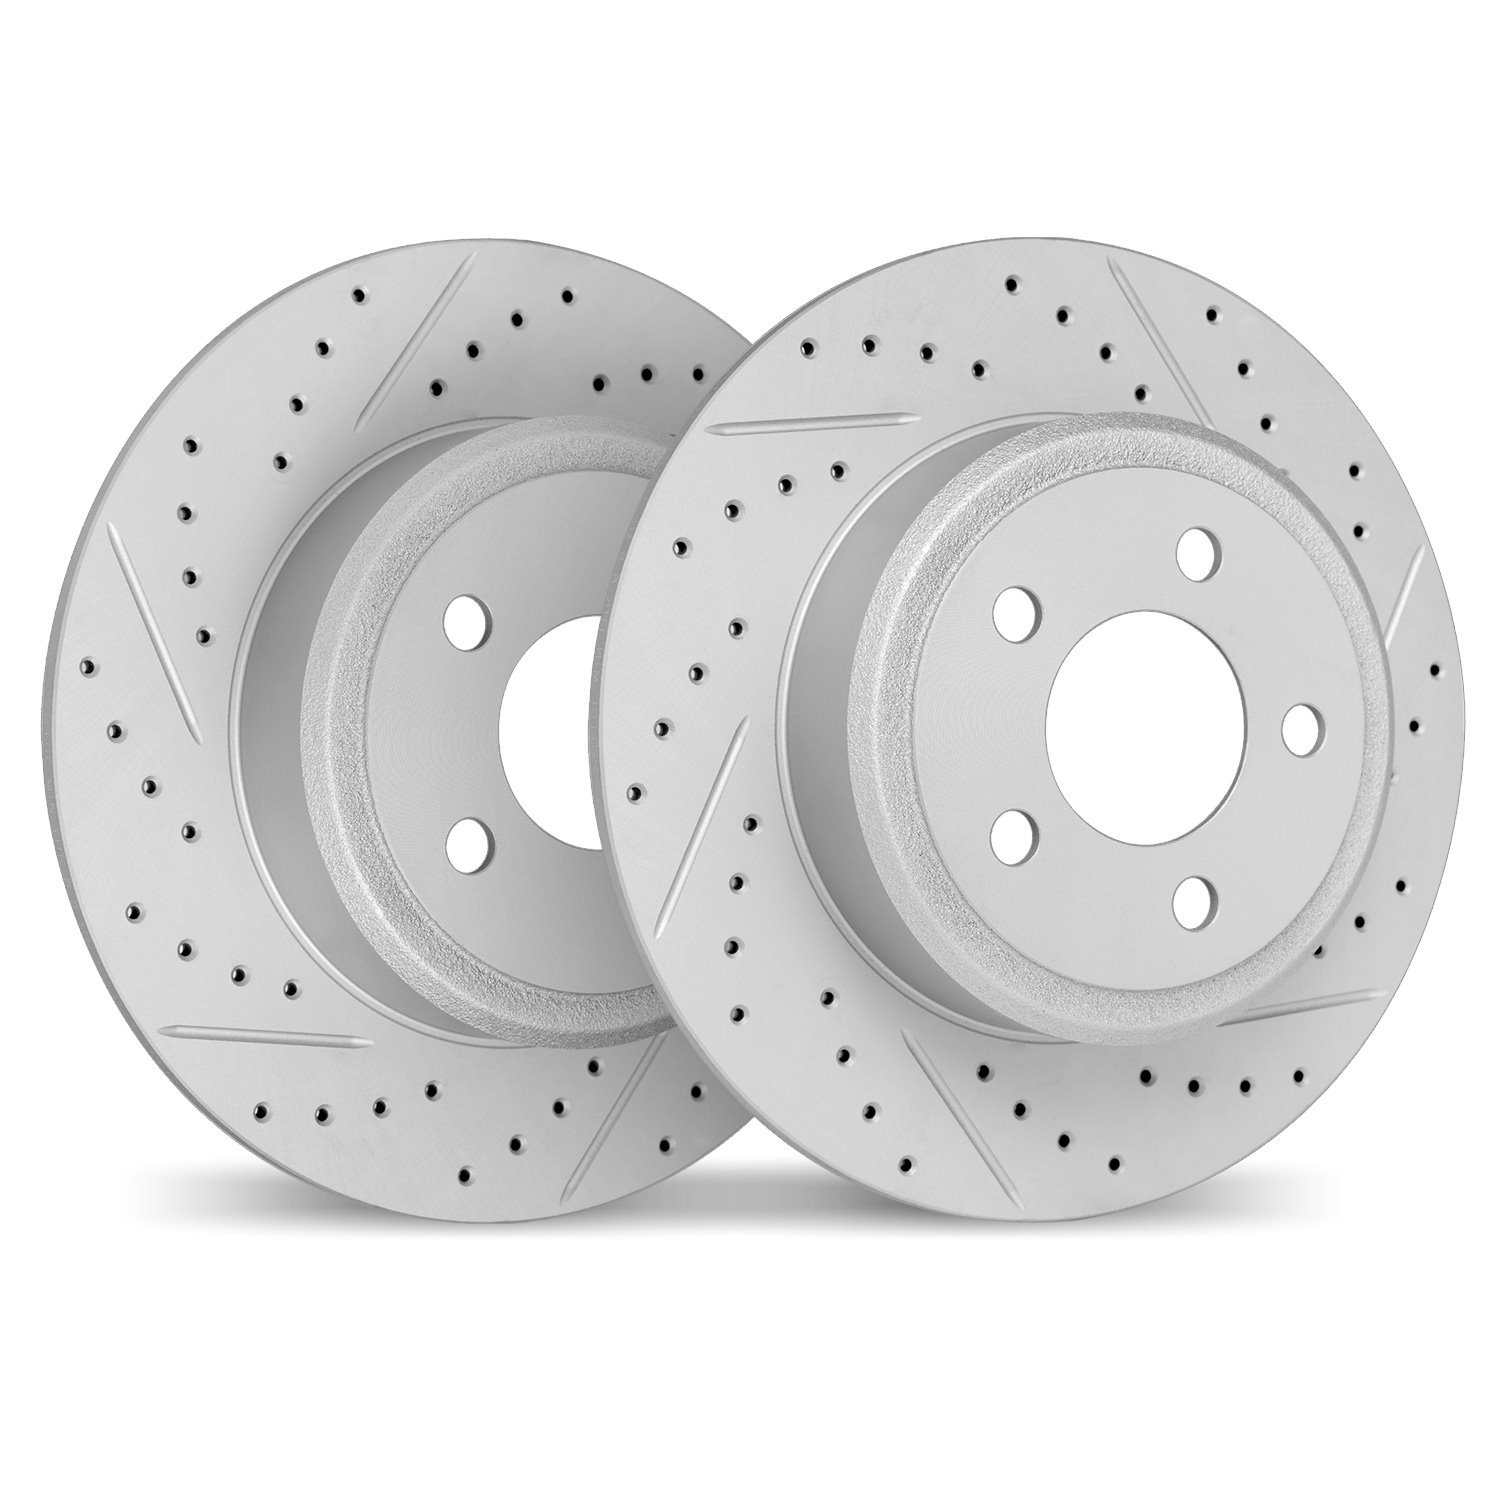 2002-11027 Geoperformance Drilled/Slotted Brake Rotors, 2003-2005 Land Rover, Position: Rear